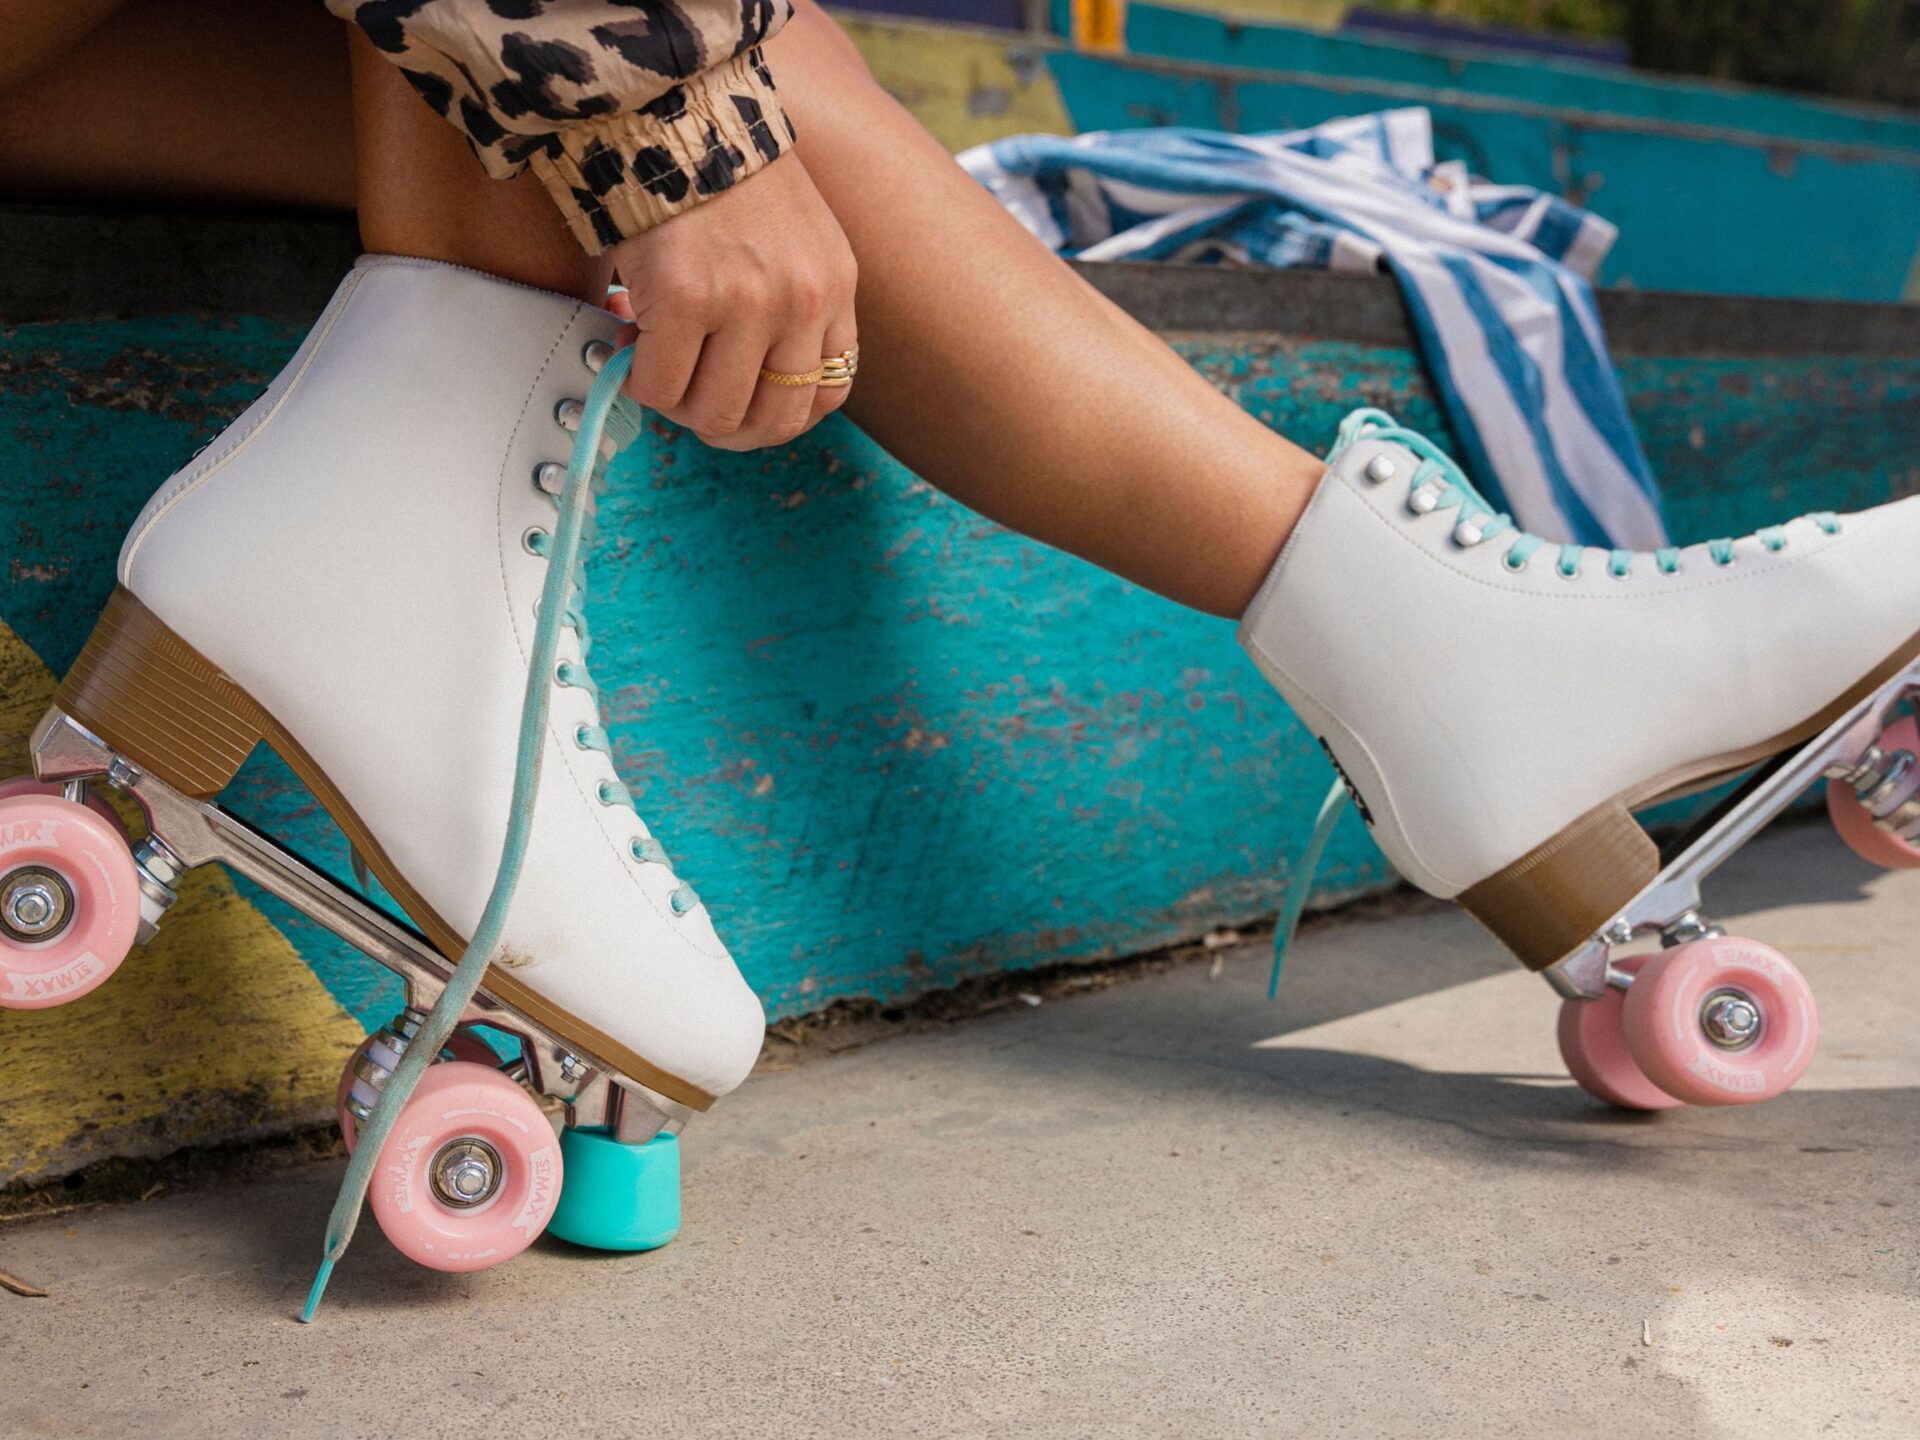 Indoor Roller Skating in Muskoka! Here&#8217;s What You Need to Know